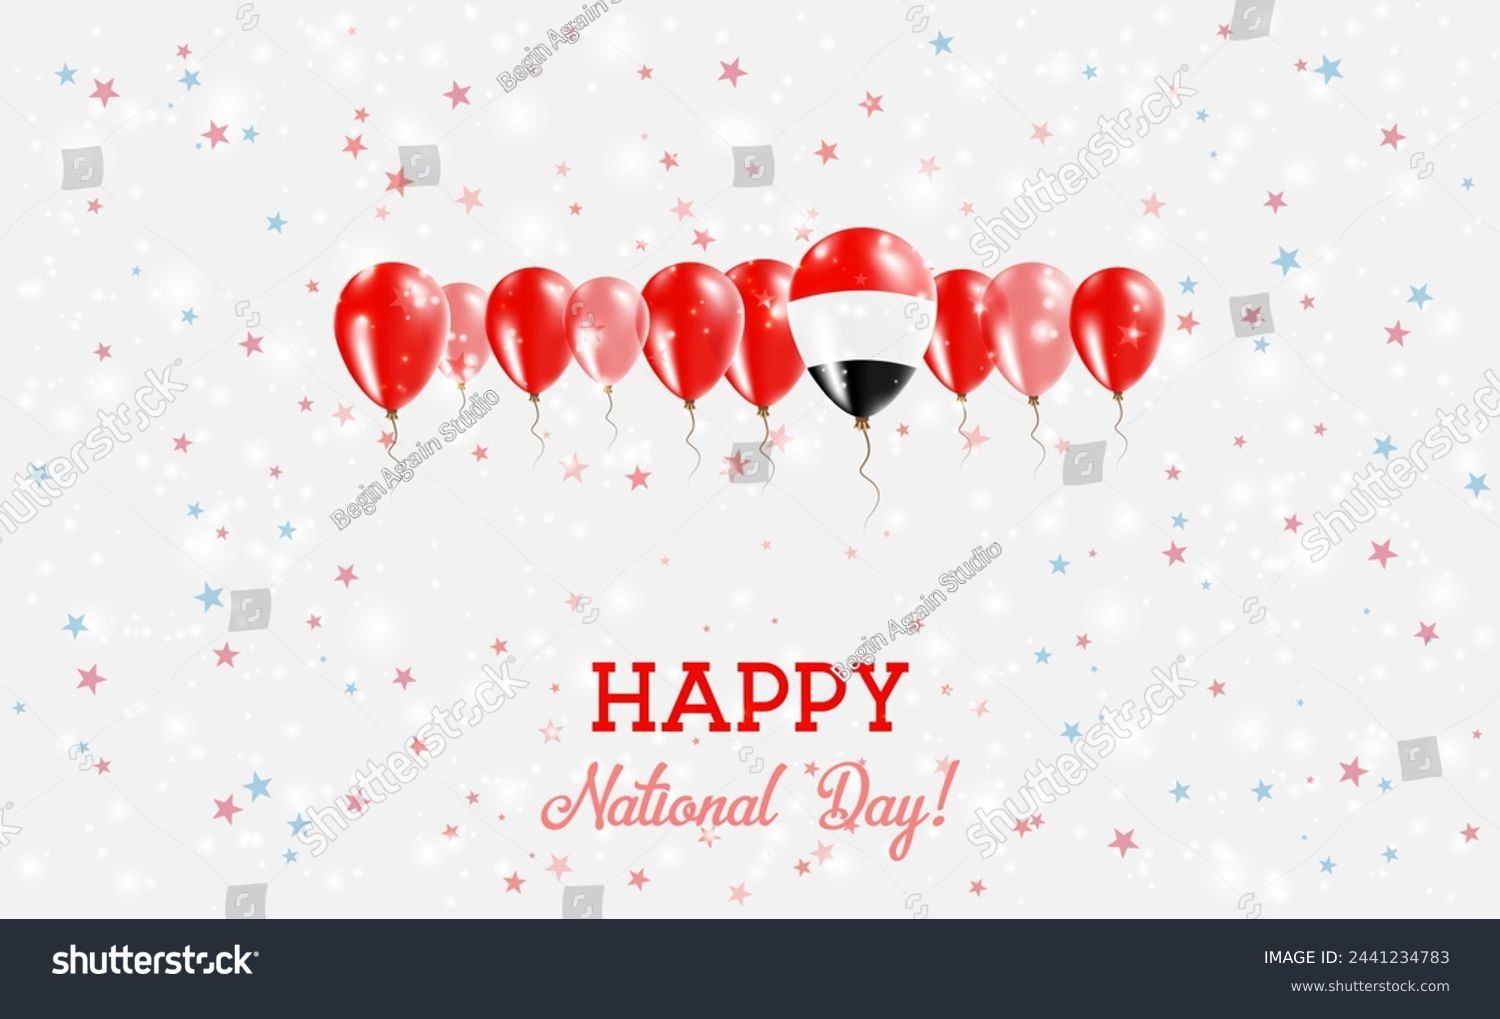 SVG of Yemen Independence Day Sparkling Patriotic Poster. Row of Balloons in Colors of the Yemeni Flag. Greeting Card with National Flags, Confetti and Stars. svg